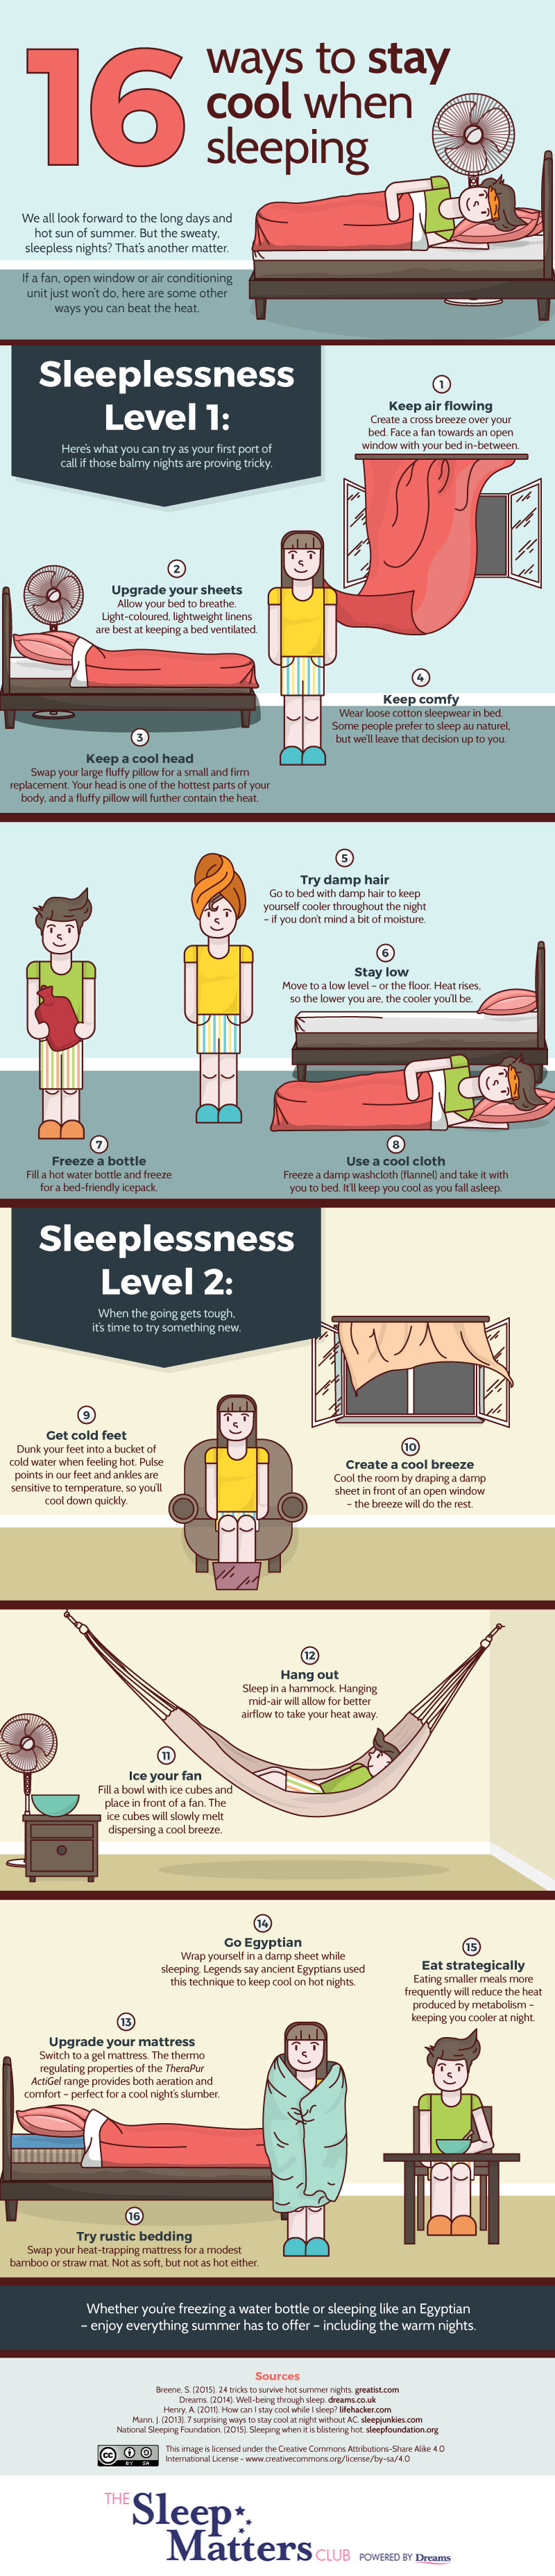 16 Ways To Stay Cool When Sleeping